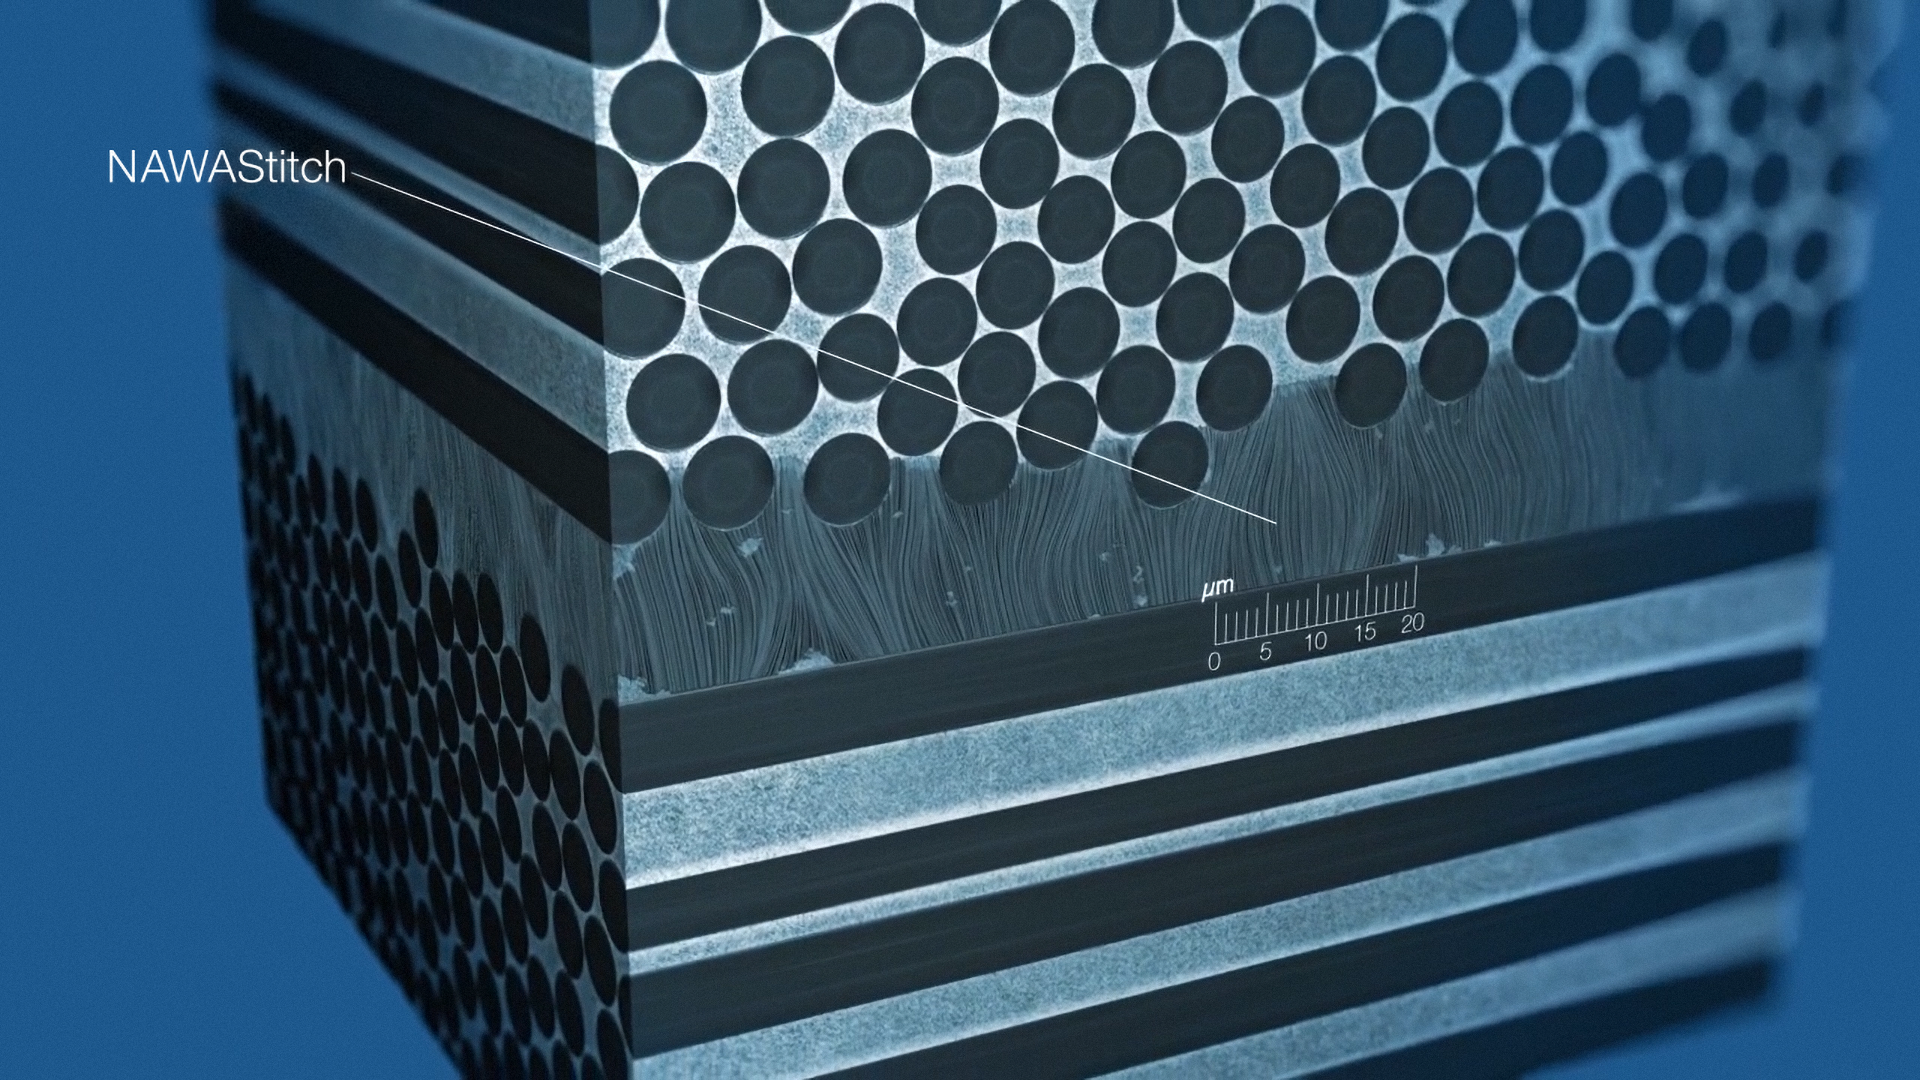 NAWAStitch technology incorporates a thin film containing trillion of vertically-aligned carbon nanotubes (VACNT) arranged perpendicular to the carbon fiber layers of the wheel.